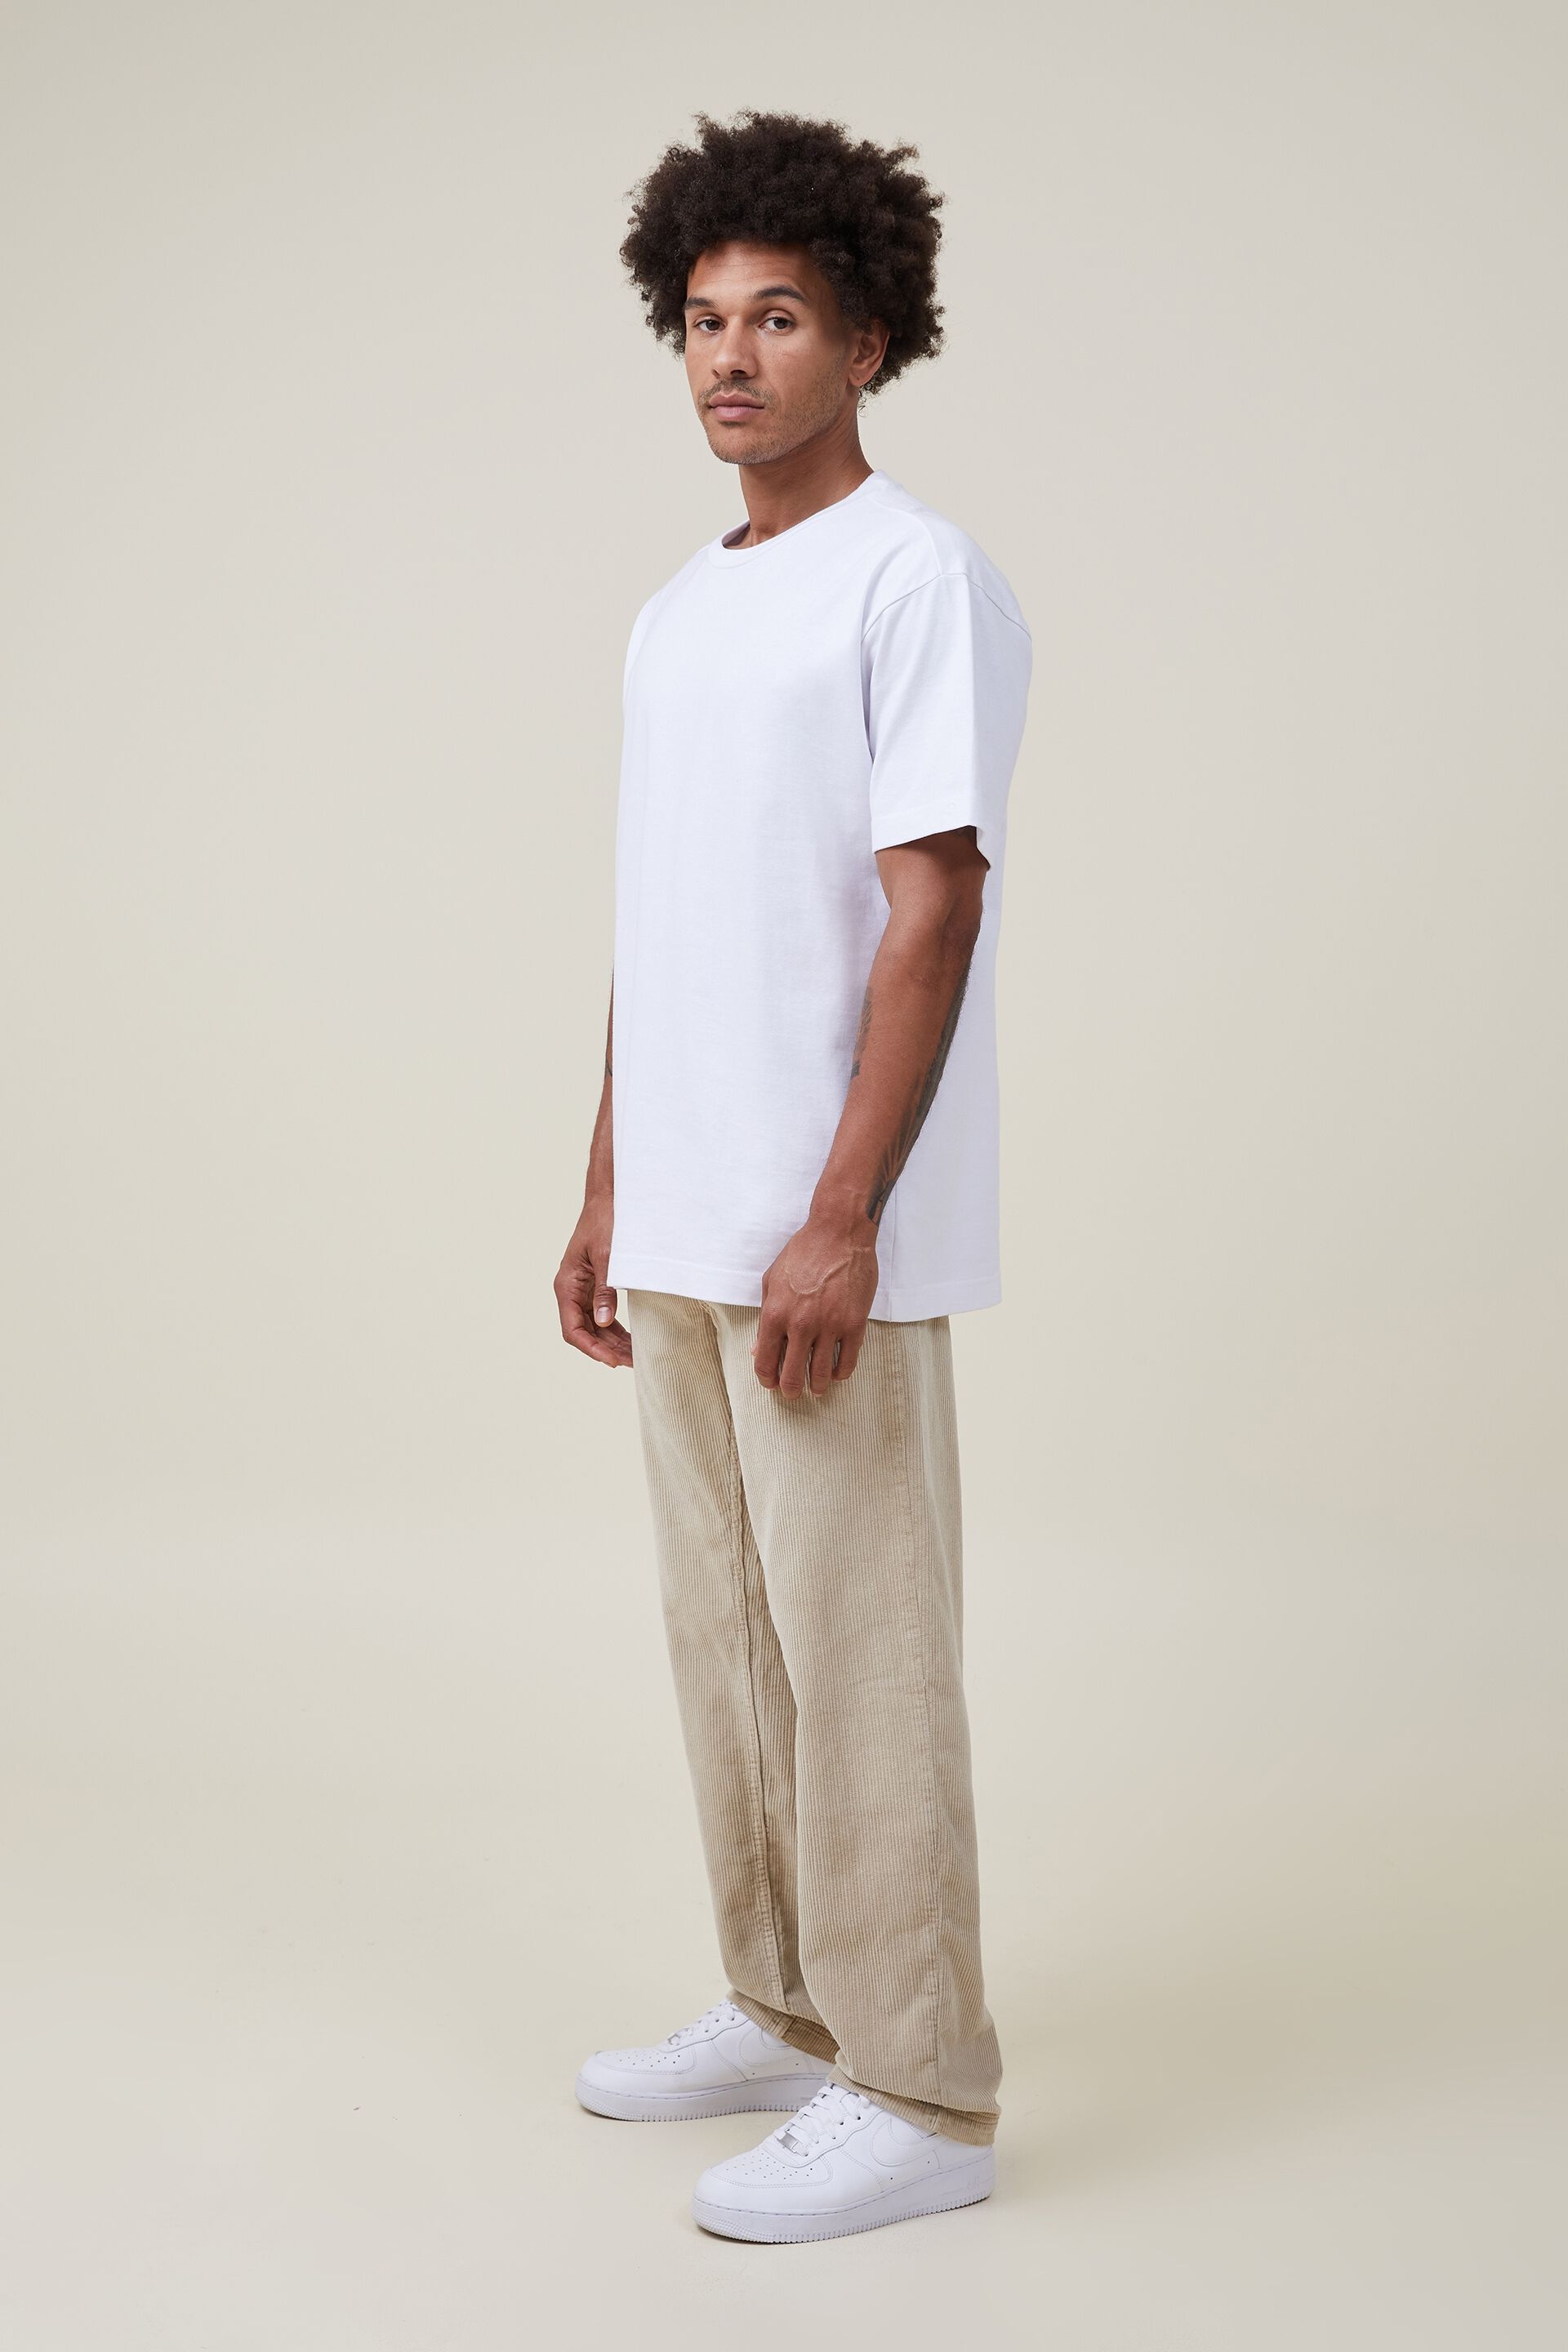 Solid Straight Pants Trousers Mens Summer Casual Elastic Waist Loose Male  Pants at Rs 2451.99 | Men Fashion Shirt | ID: 2851553335488